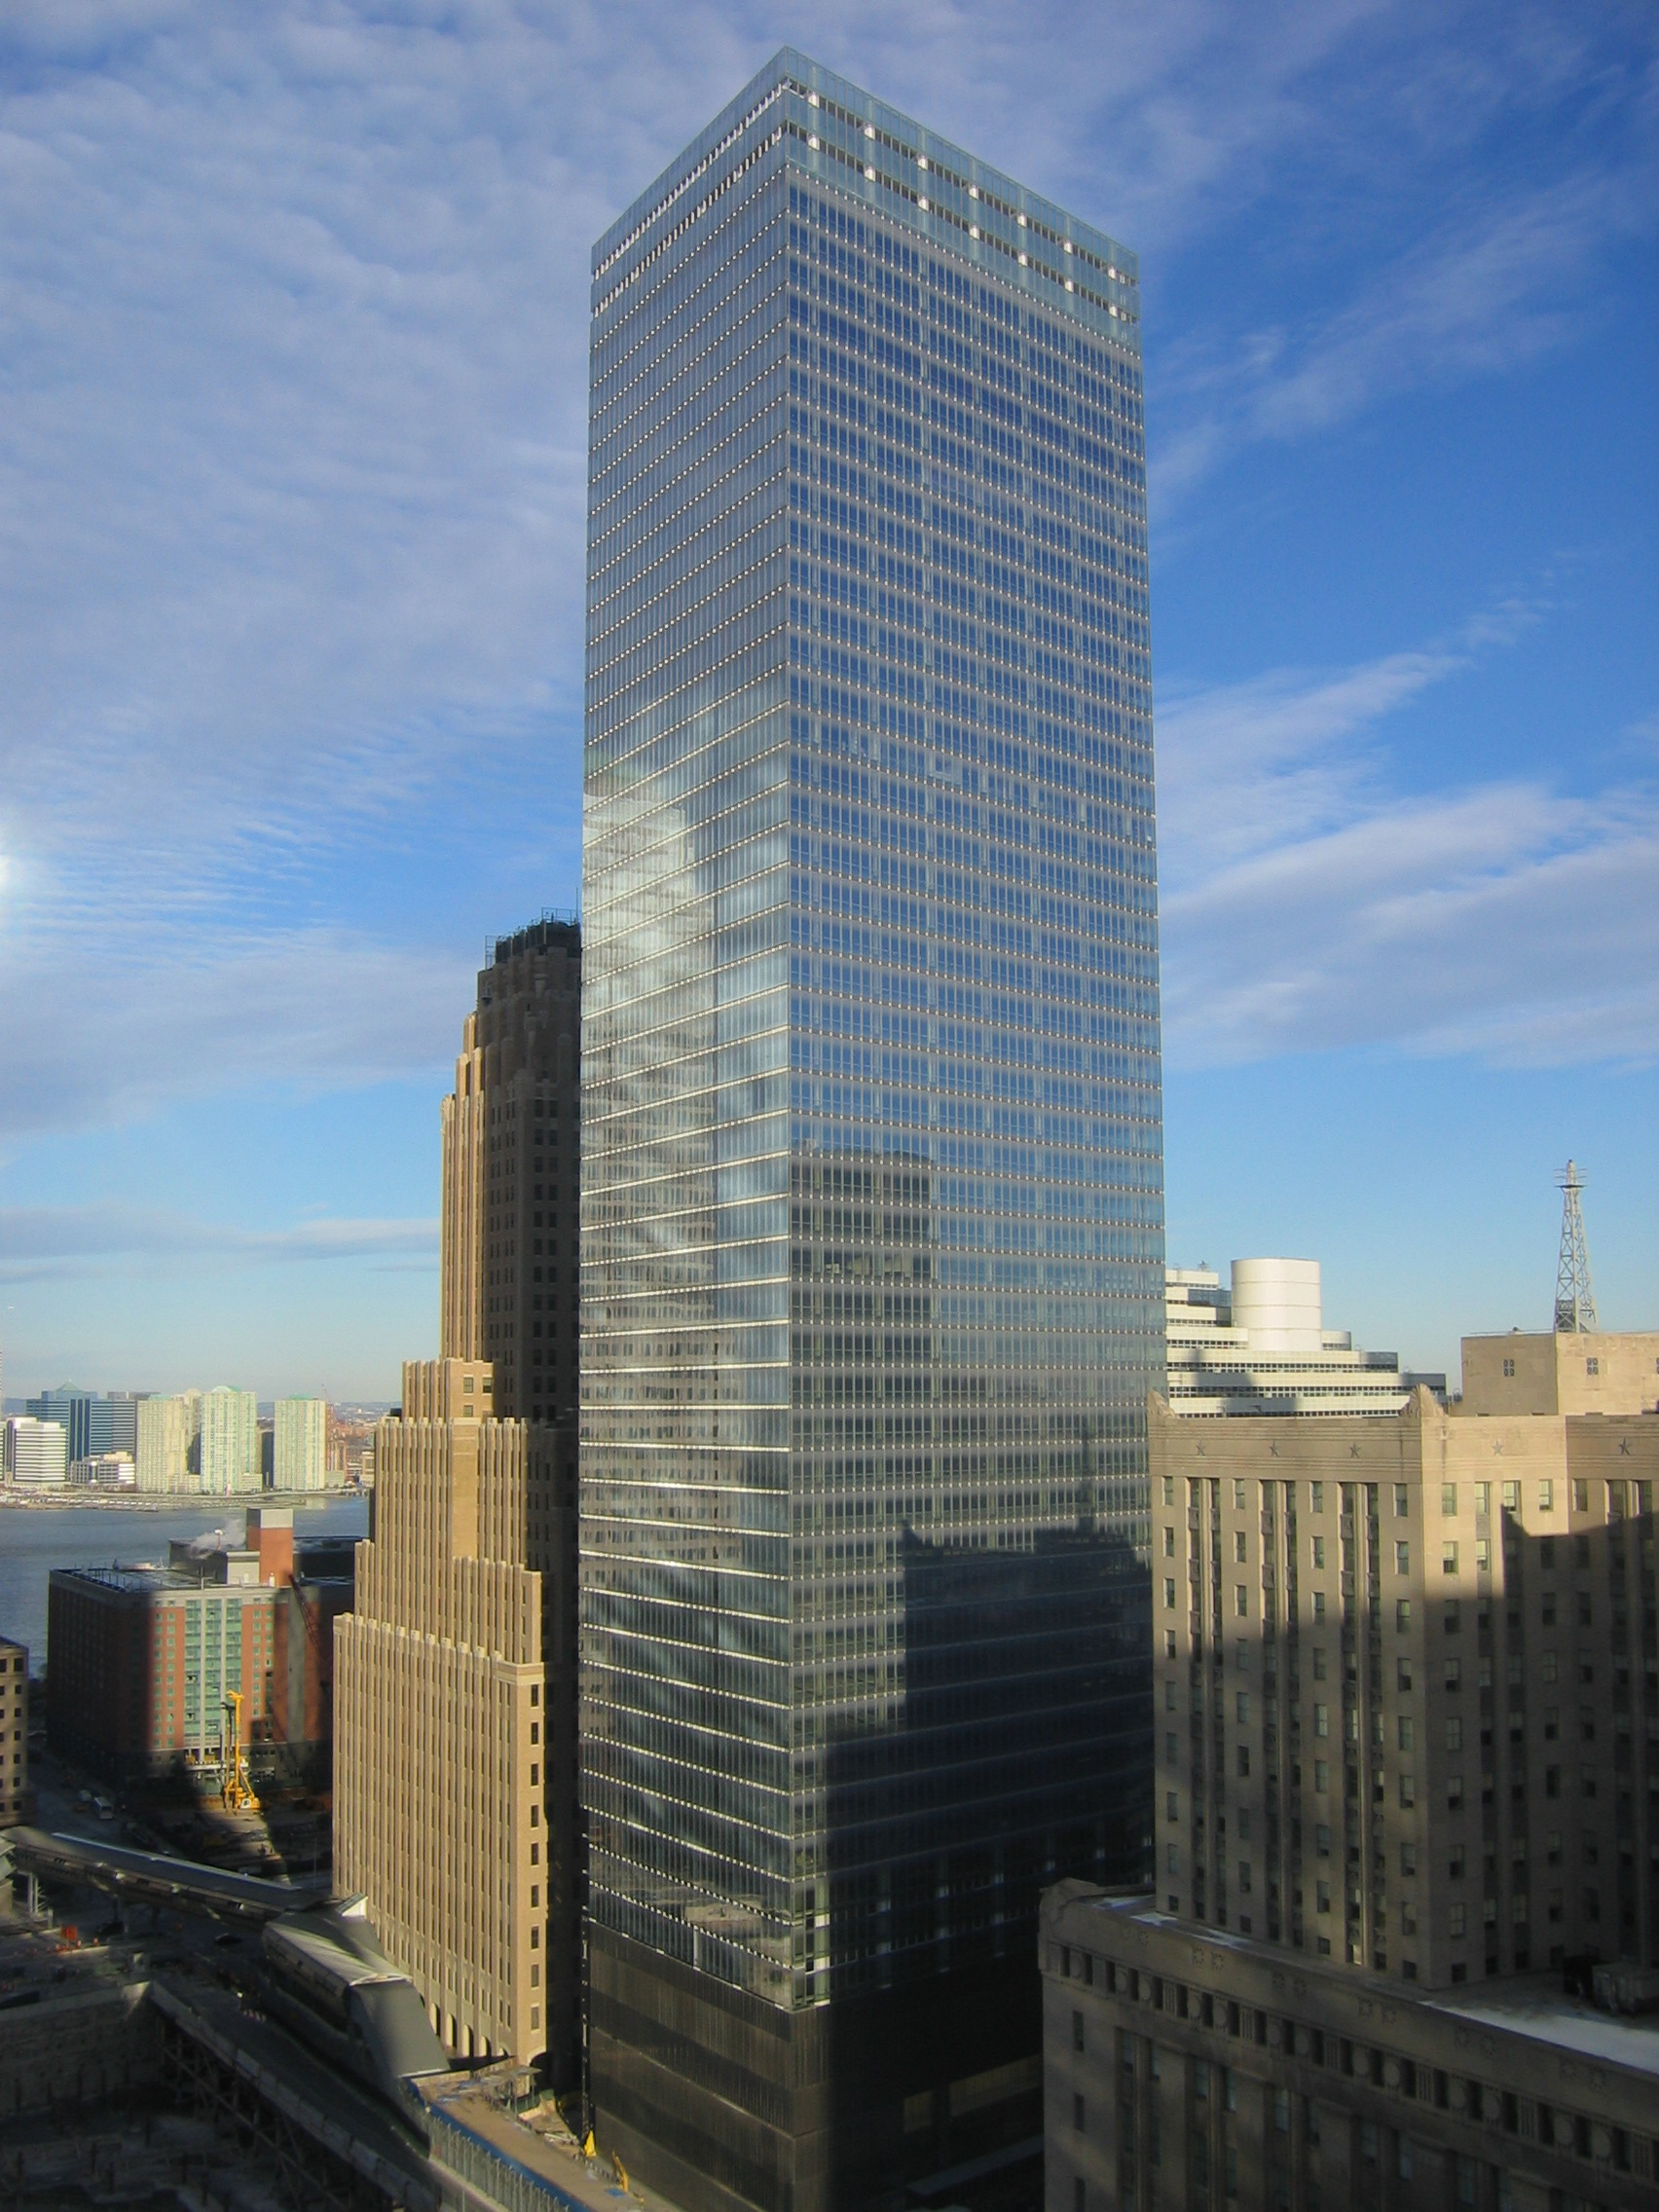 The new, 52-story 7 World Trade Center.